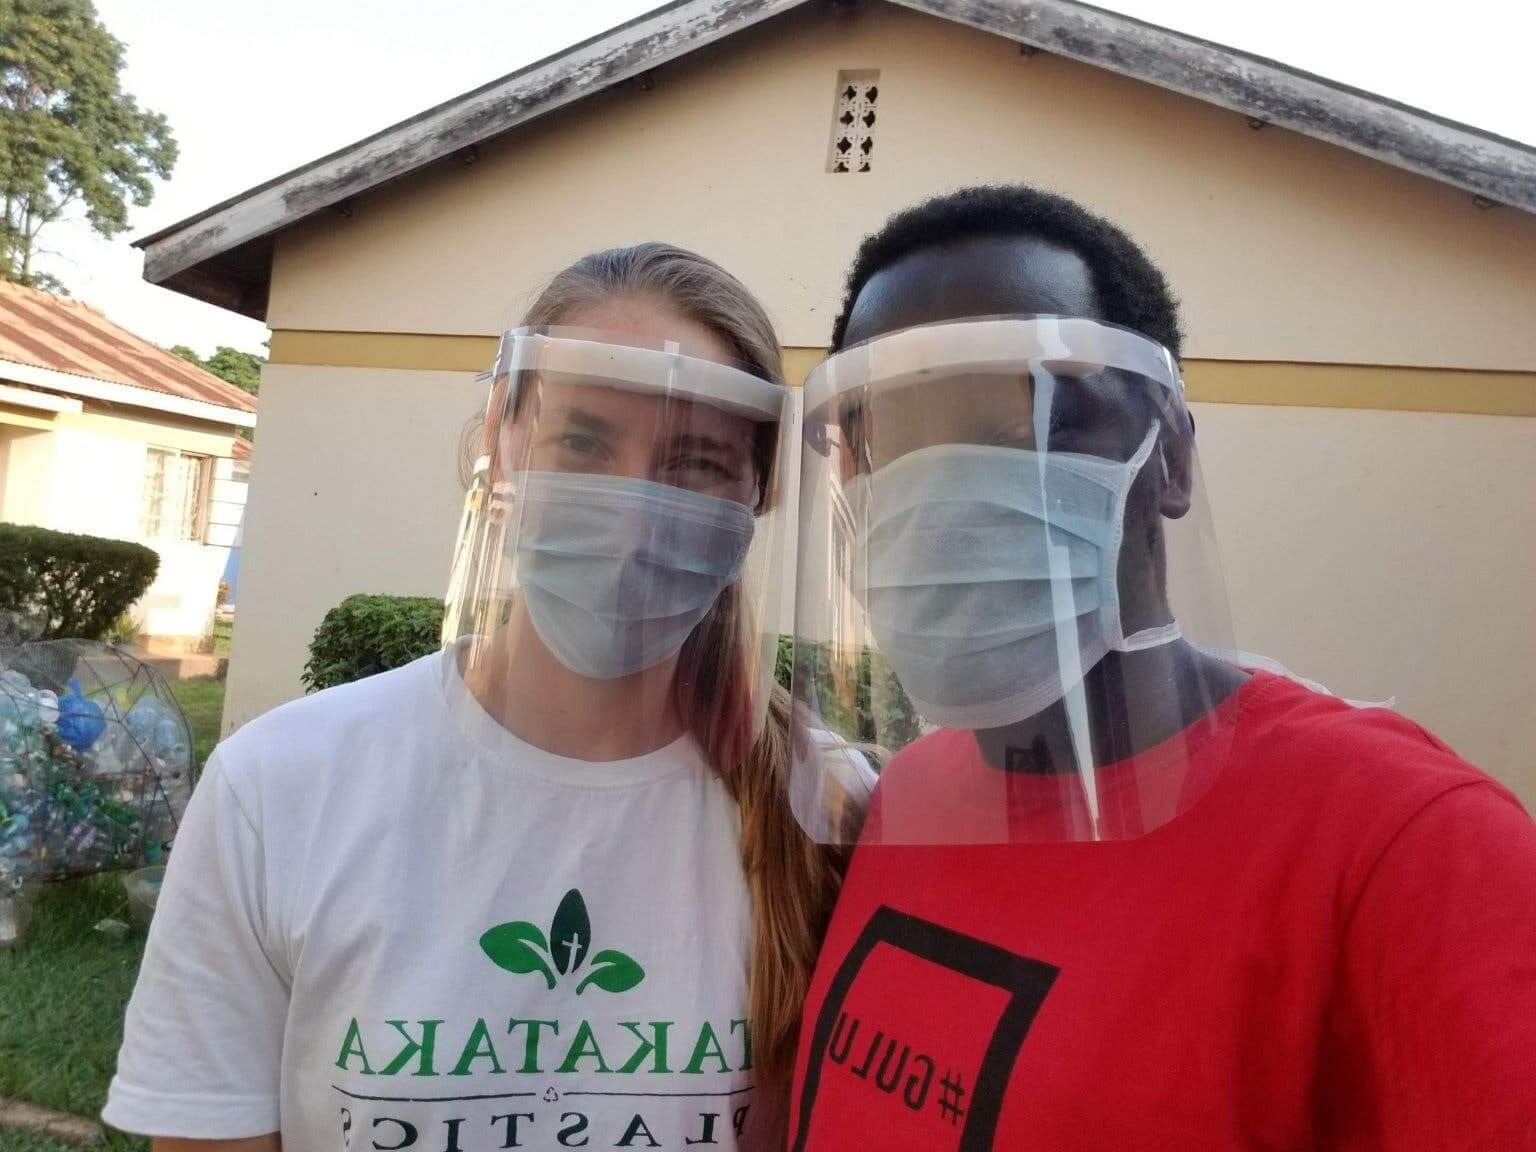 A Startup In Uganda Is Manufacturing Face Shields From Recycled Plastic